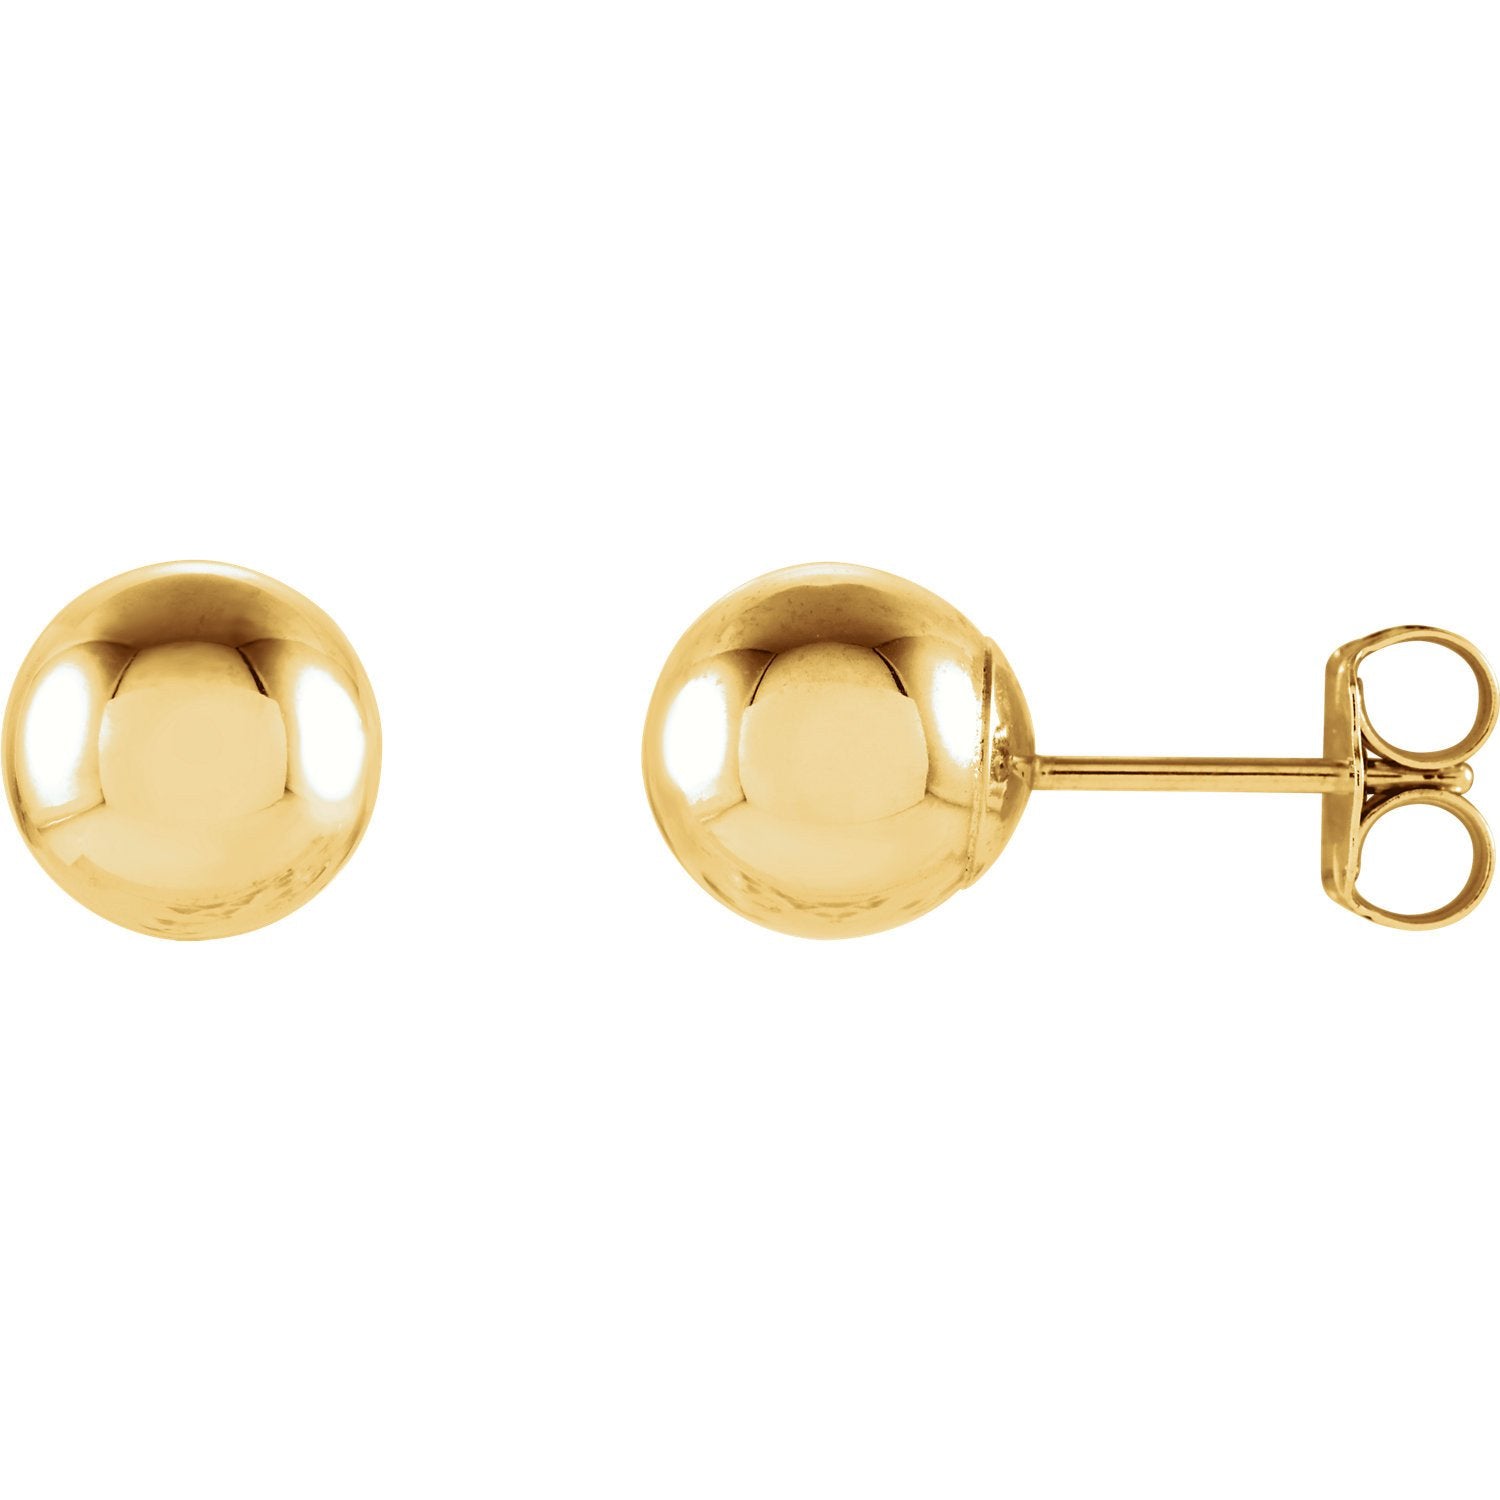 7mm Ball Earrings with Bright Finish - 14K Gold (Yellow or White)